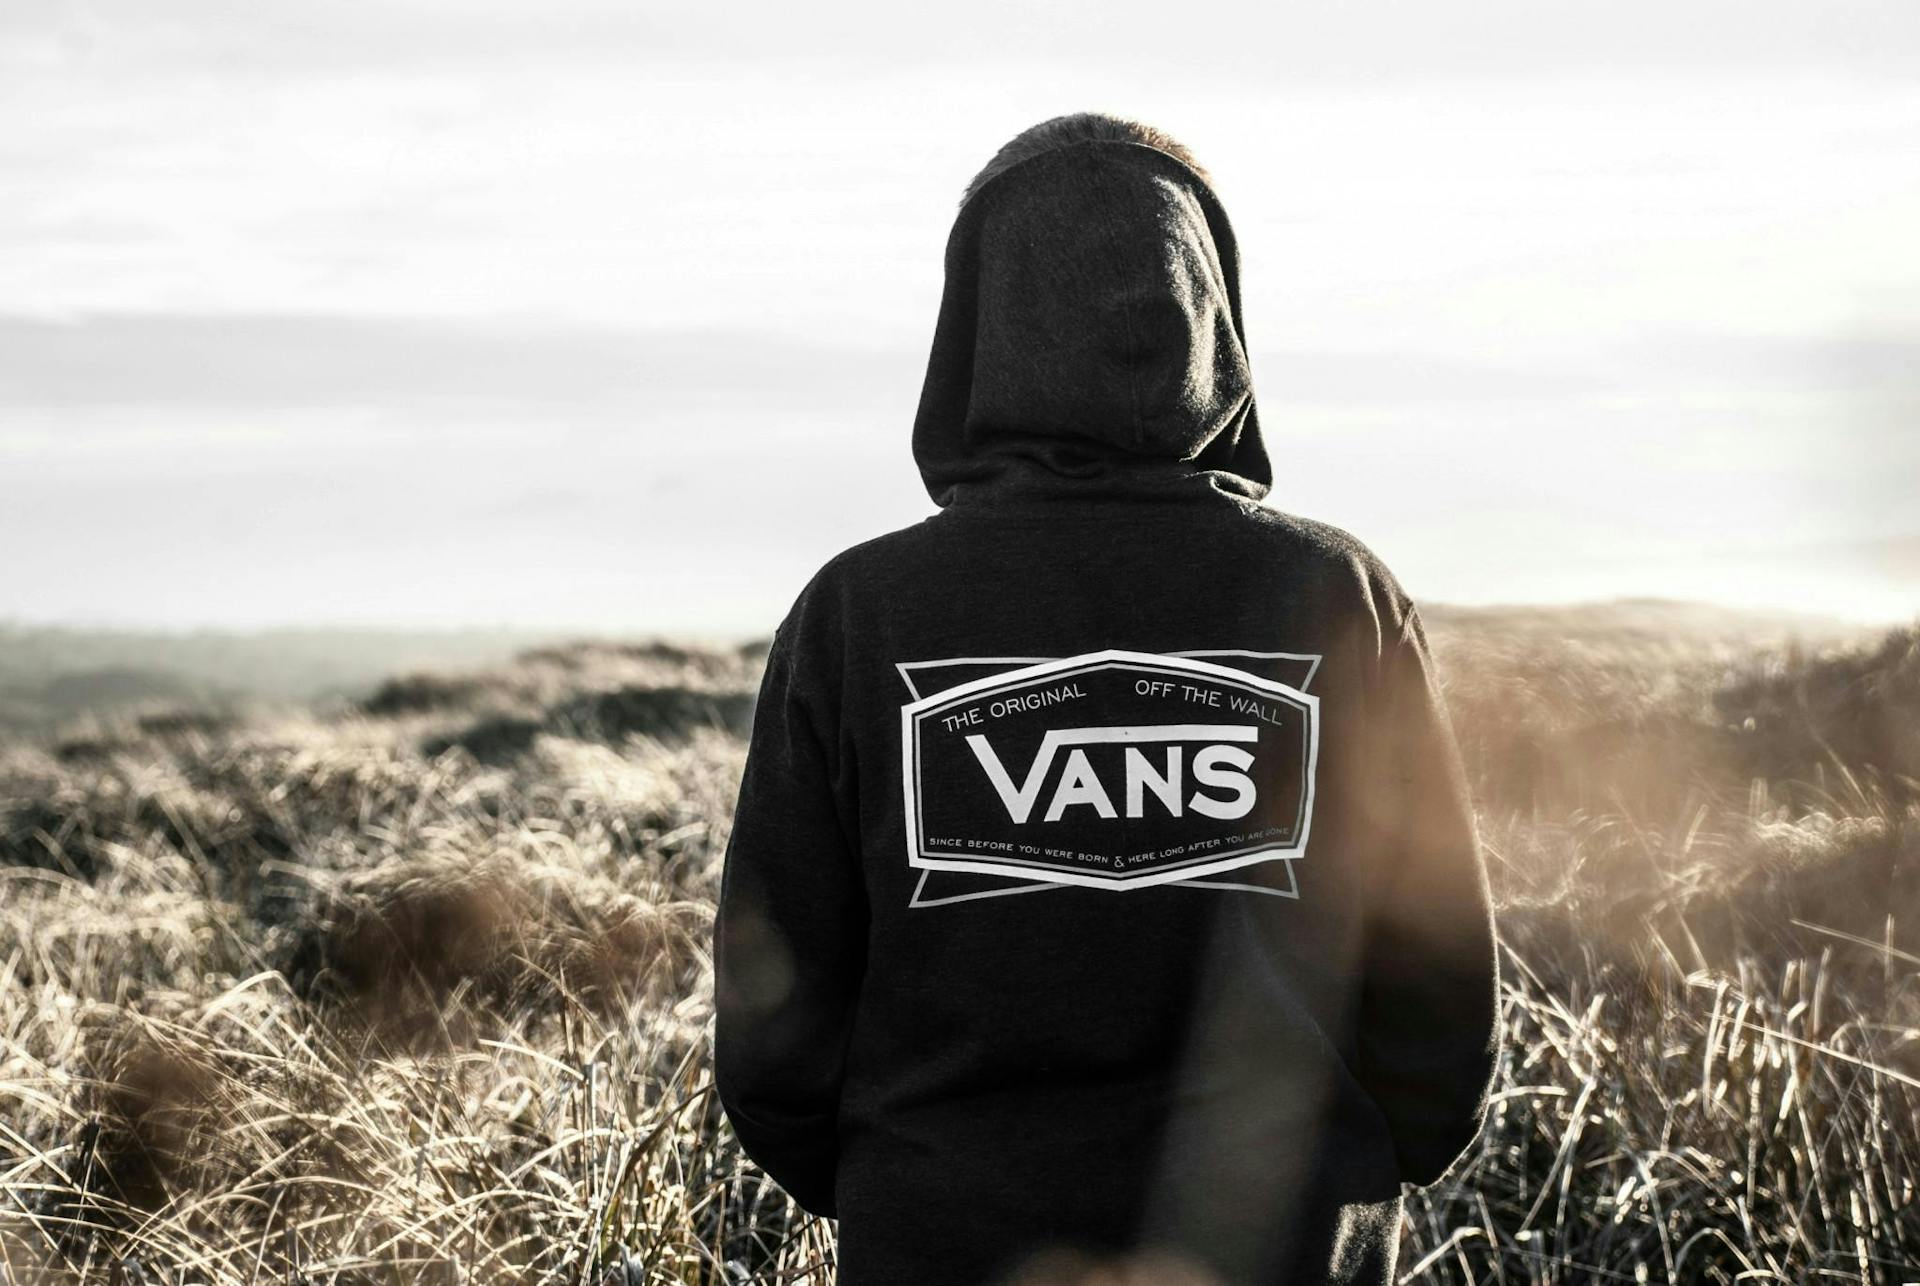 Photo of someone's back who is standing in an open field waring a VANS hoodie